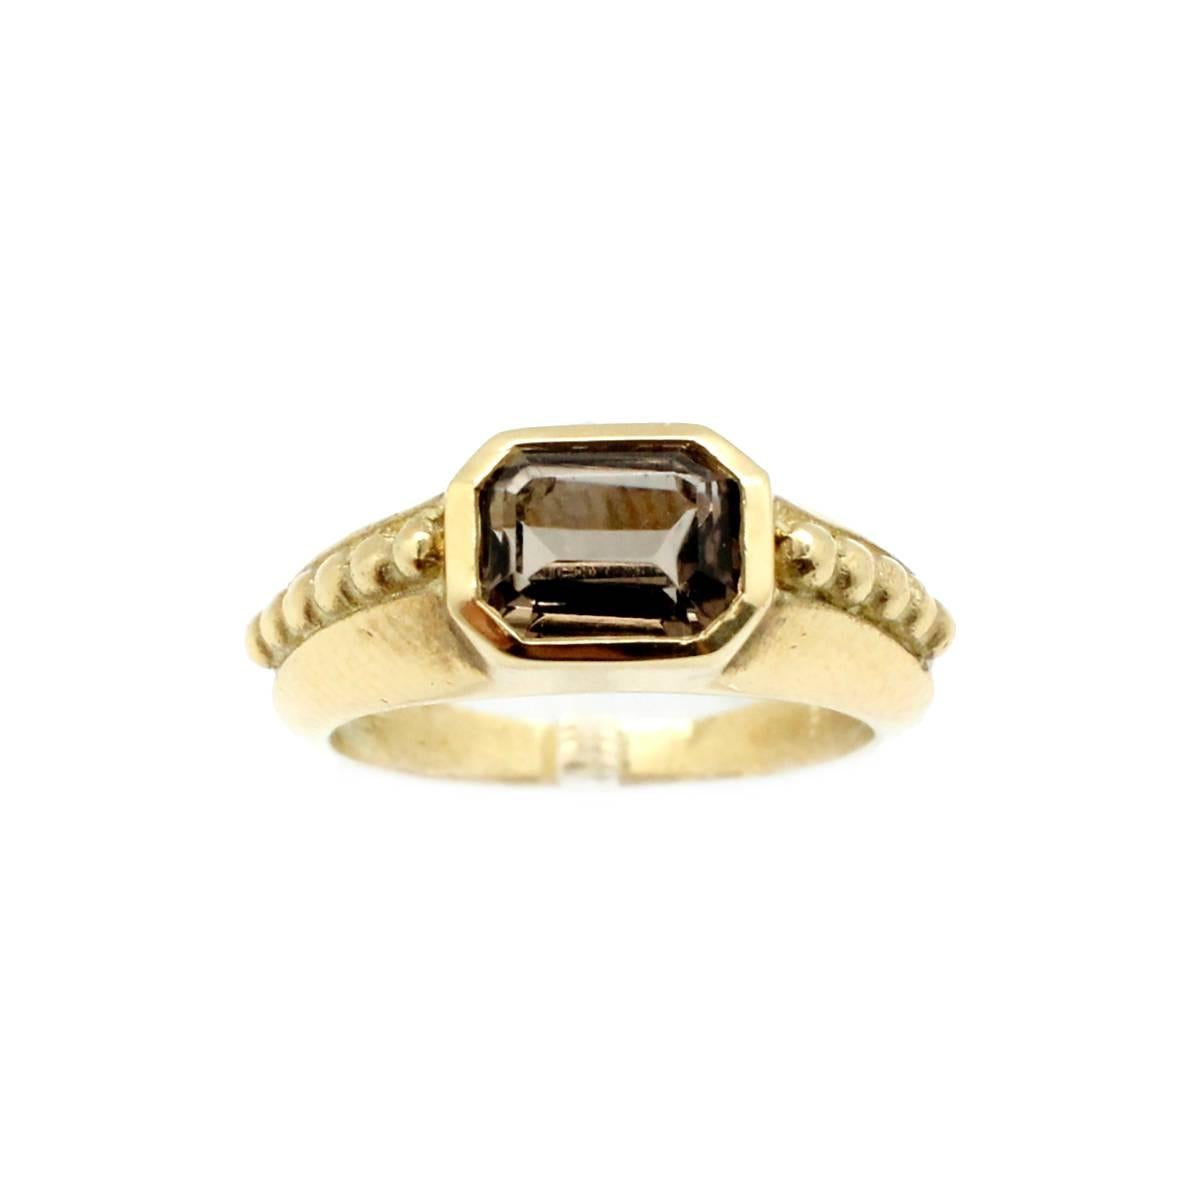 This ring is made in 18k yellow gold by Judith Ripka. The piece is signed “© Judith Ripka 18k.” The ring holds a single piece of smoky quartz at its center. The ring measures 7mm wide, and it weighs 7.5 grams. It is a size 6.